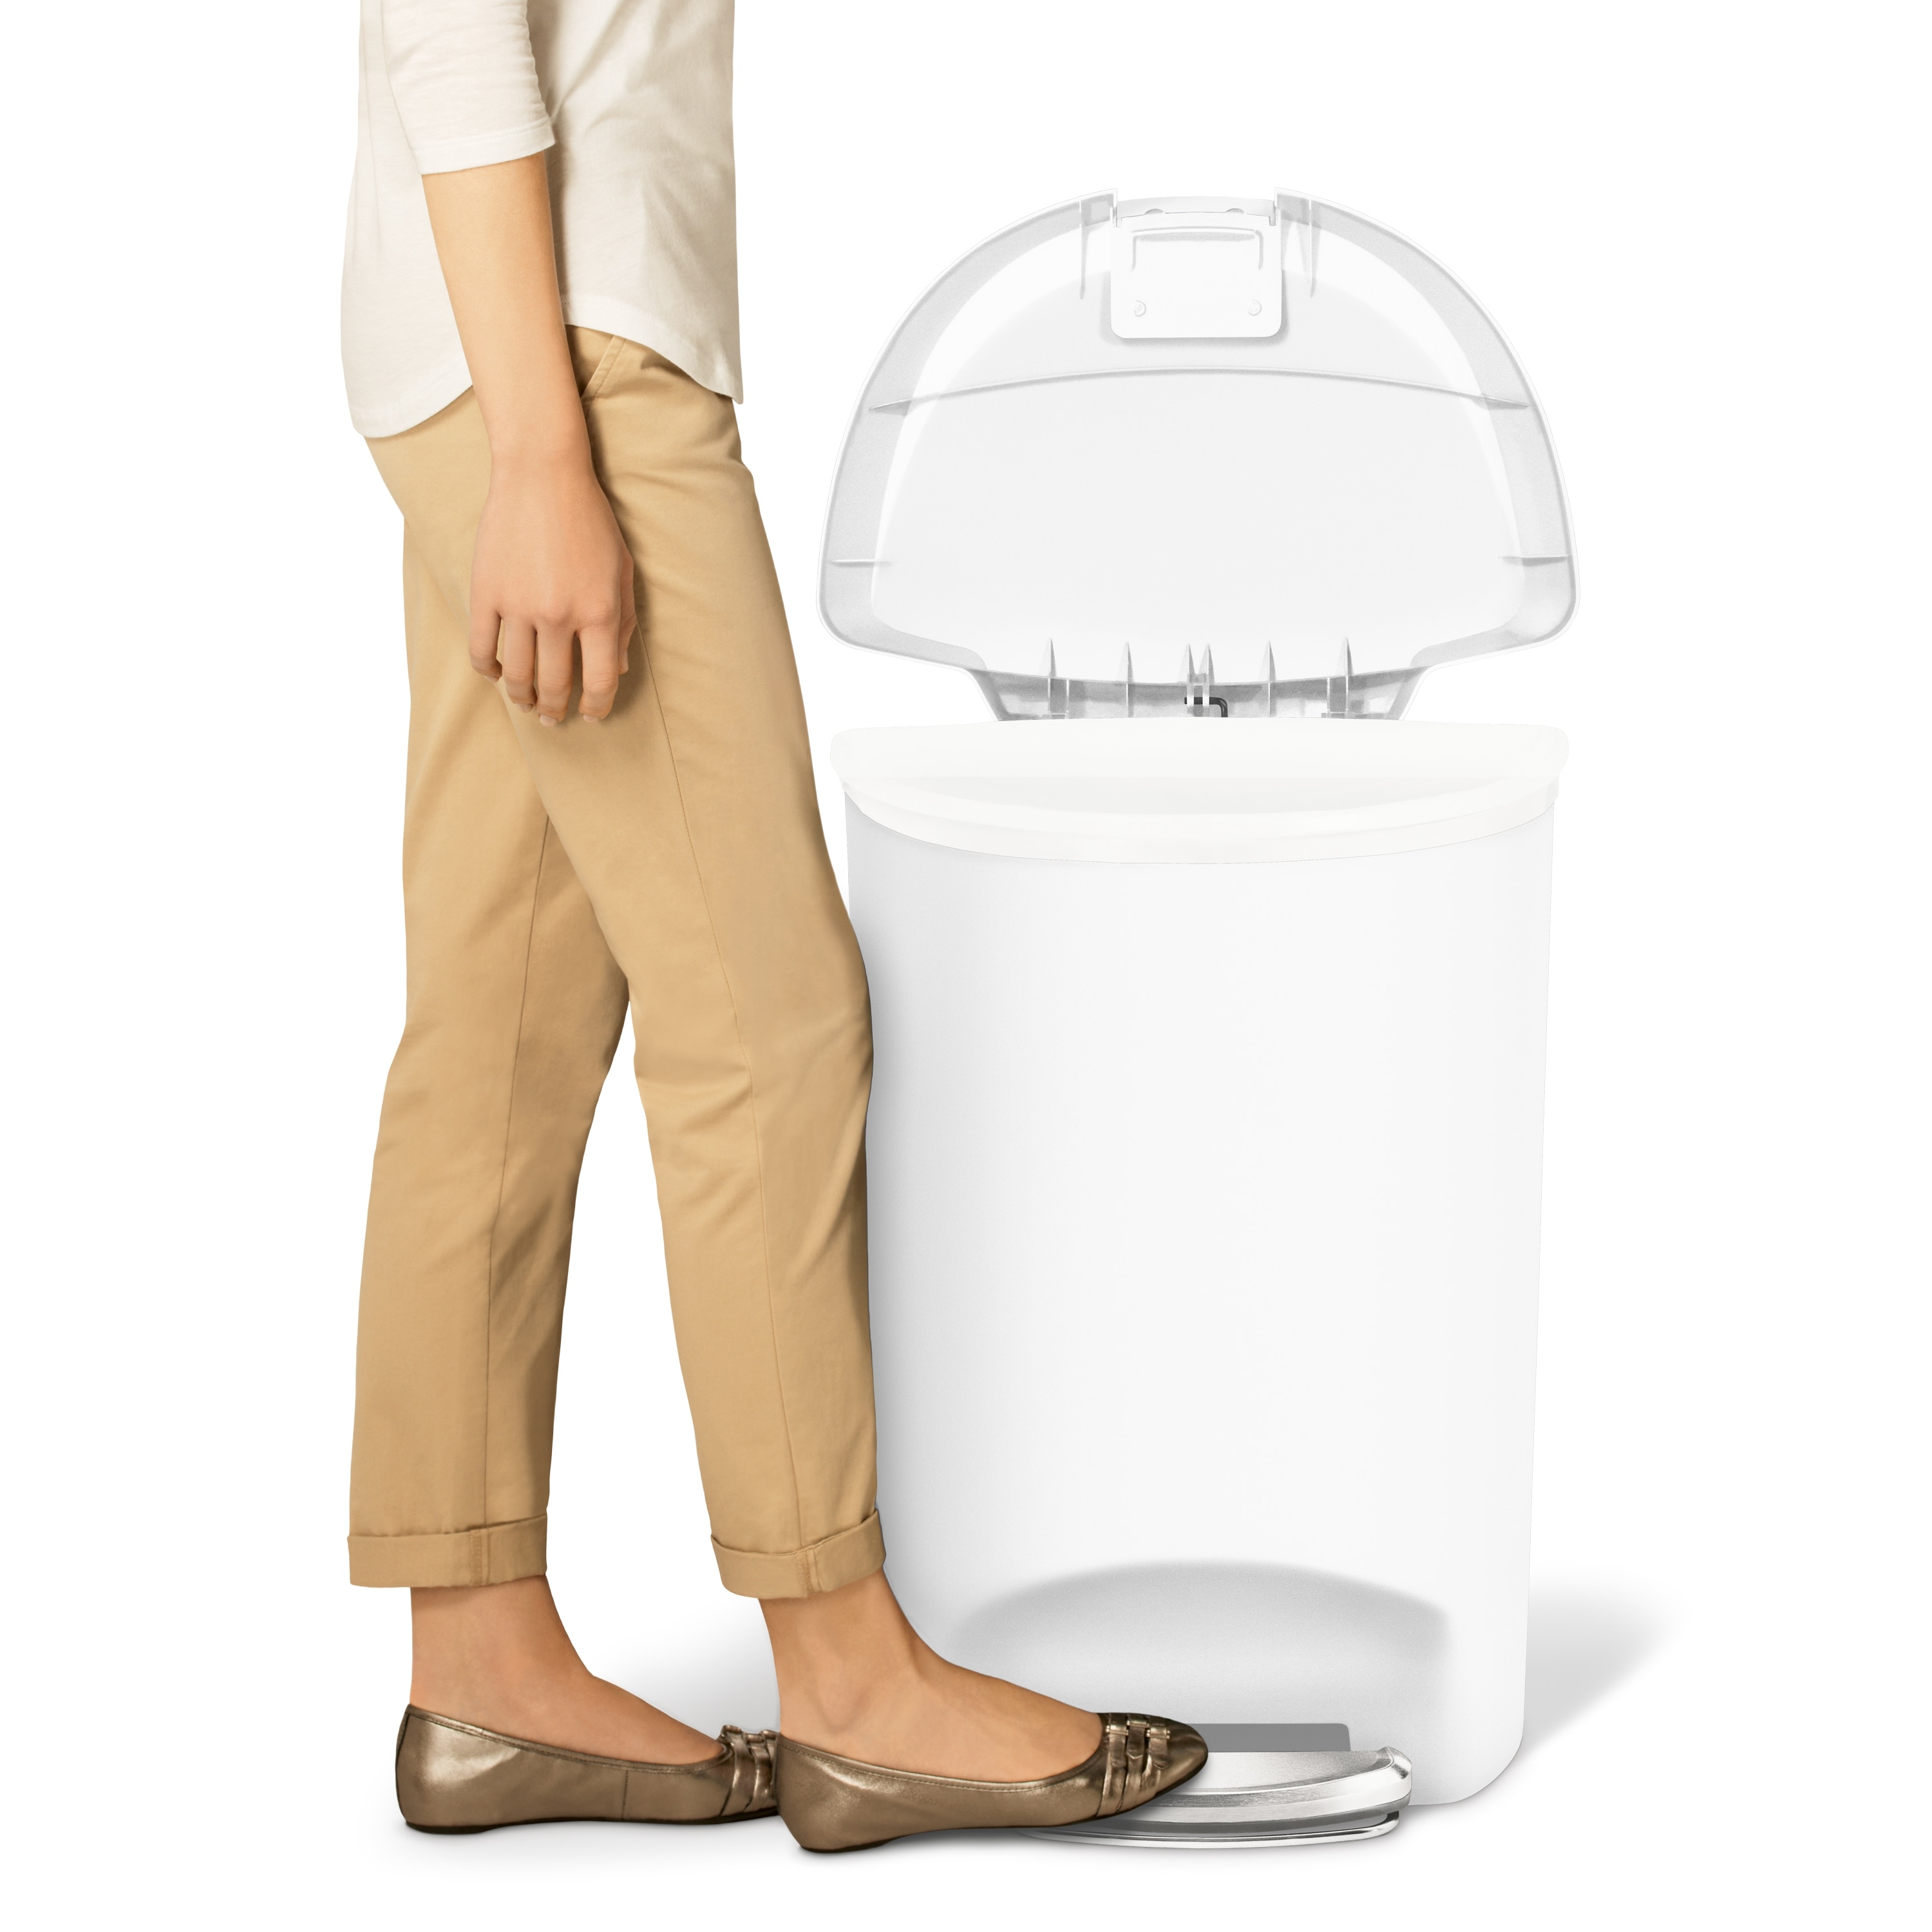 Simple Human Trash Cans for sale in Boise, Idaho